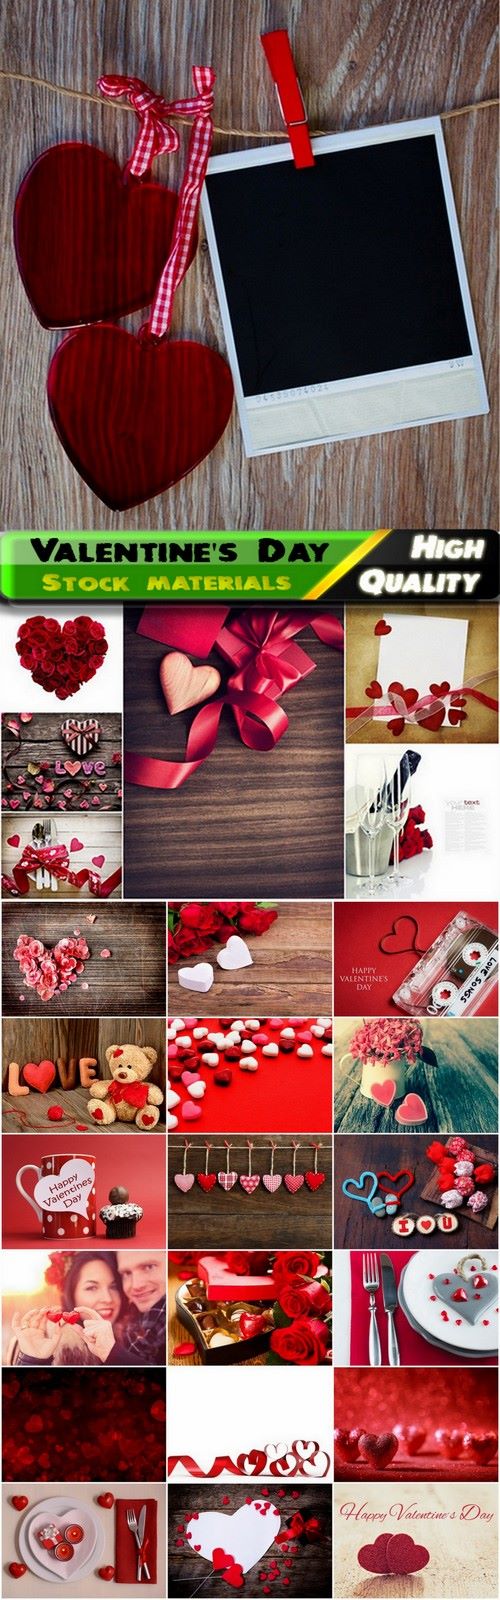 Beautiful backgrounds for greeting cards for Valentine's Day - 25 HQ Jpg